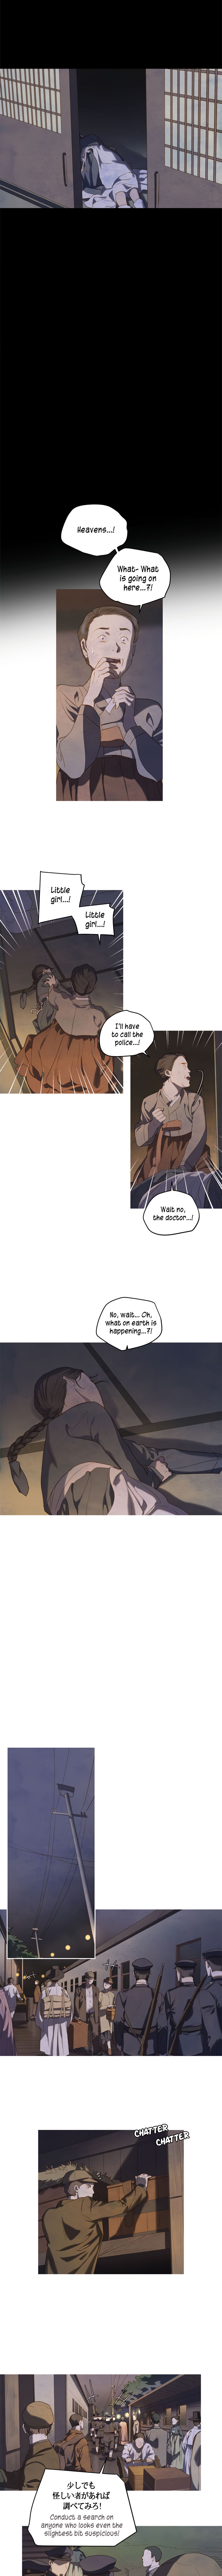 Gorae Byul - The Gyeongseong Mermaid - Chapter 8 Page 8